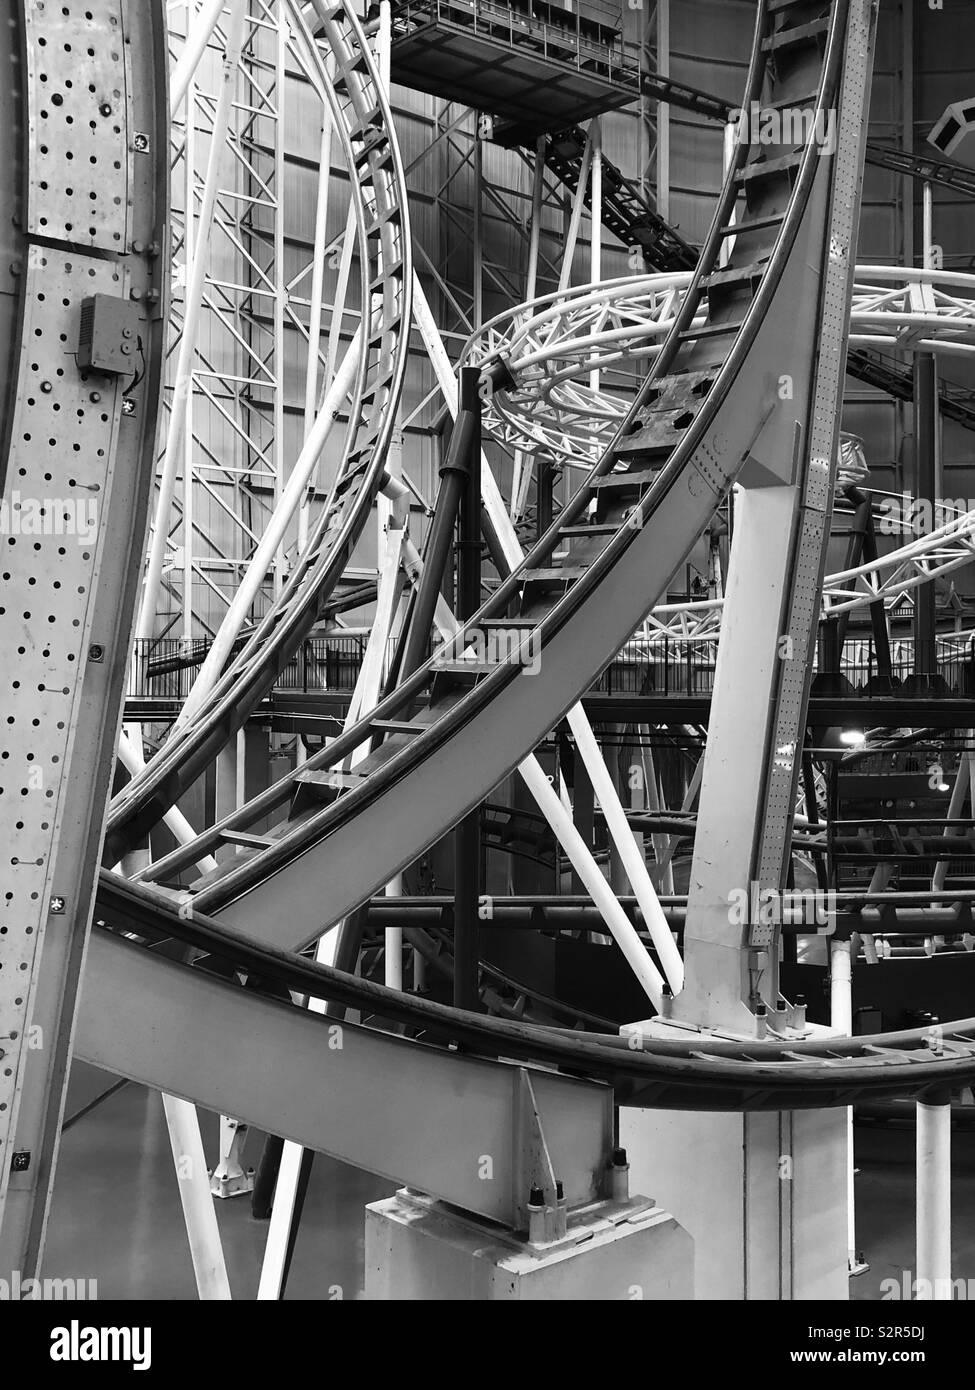 West Edmonton Mall Closes Mindbender Roller Coaster After 37 Years